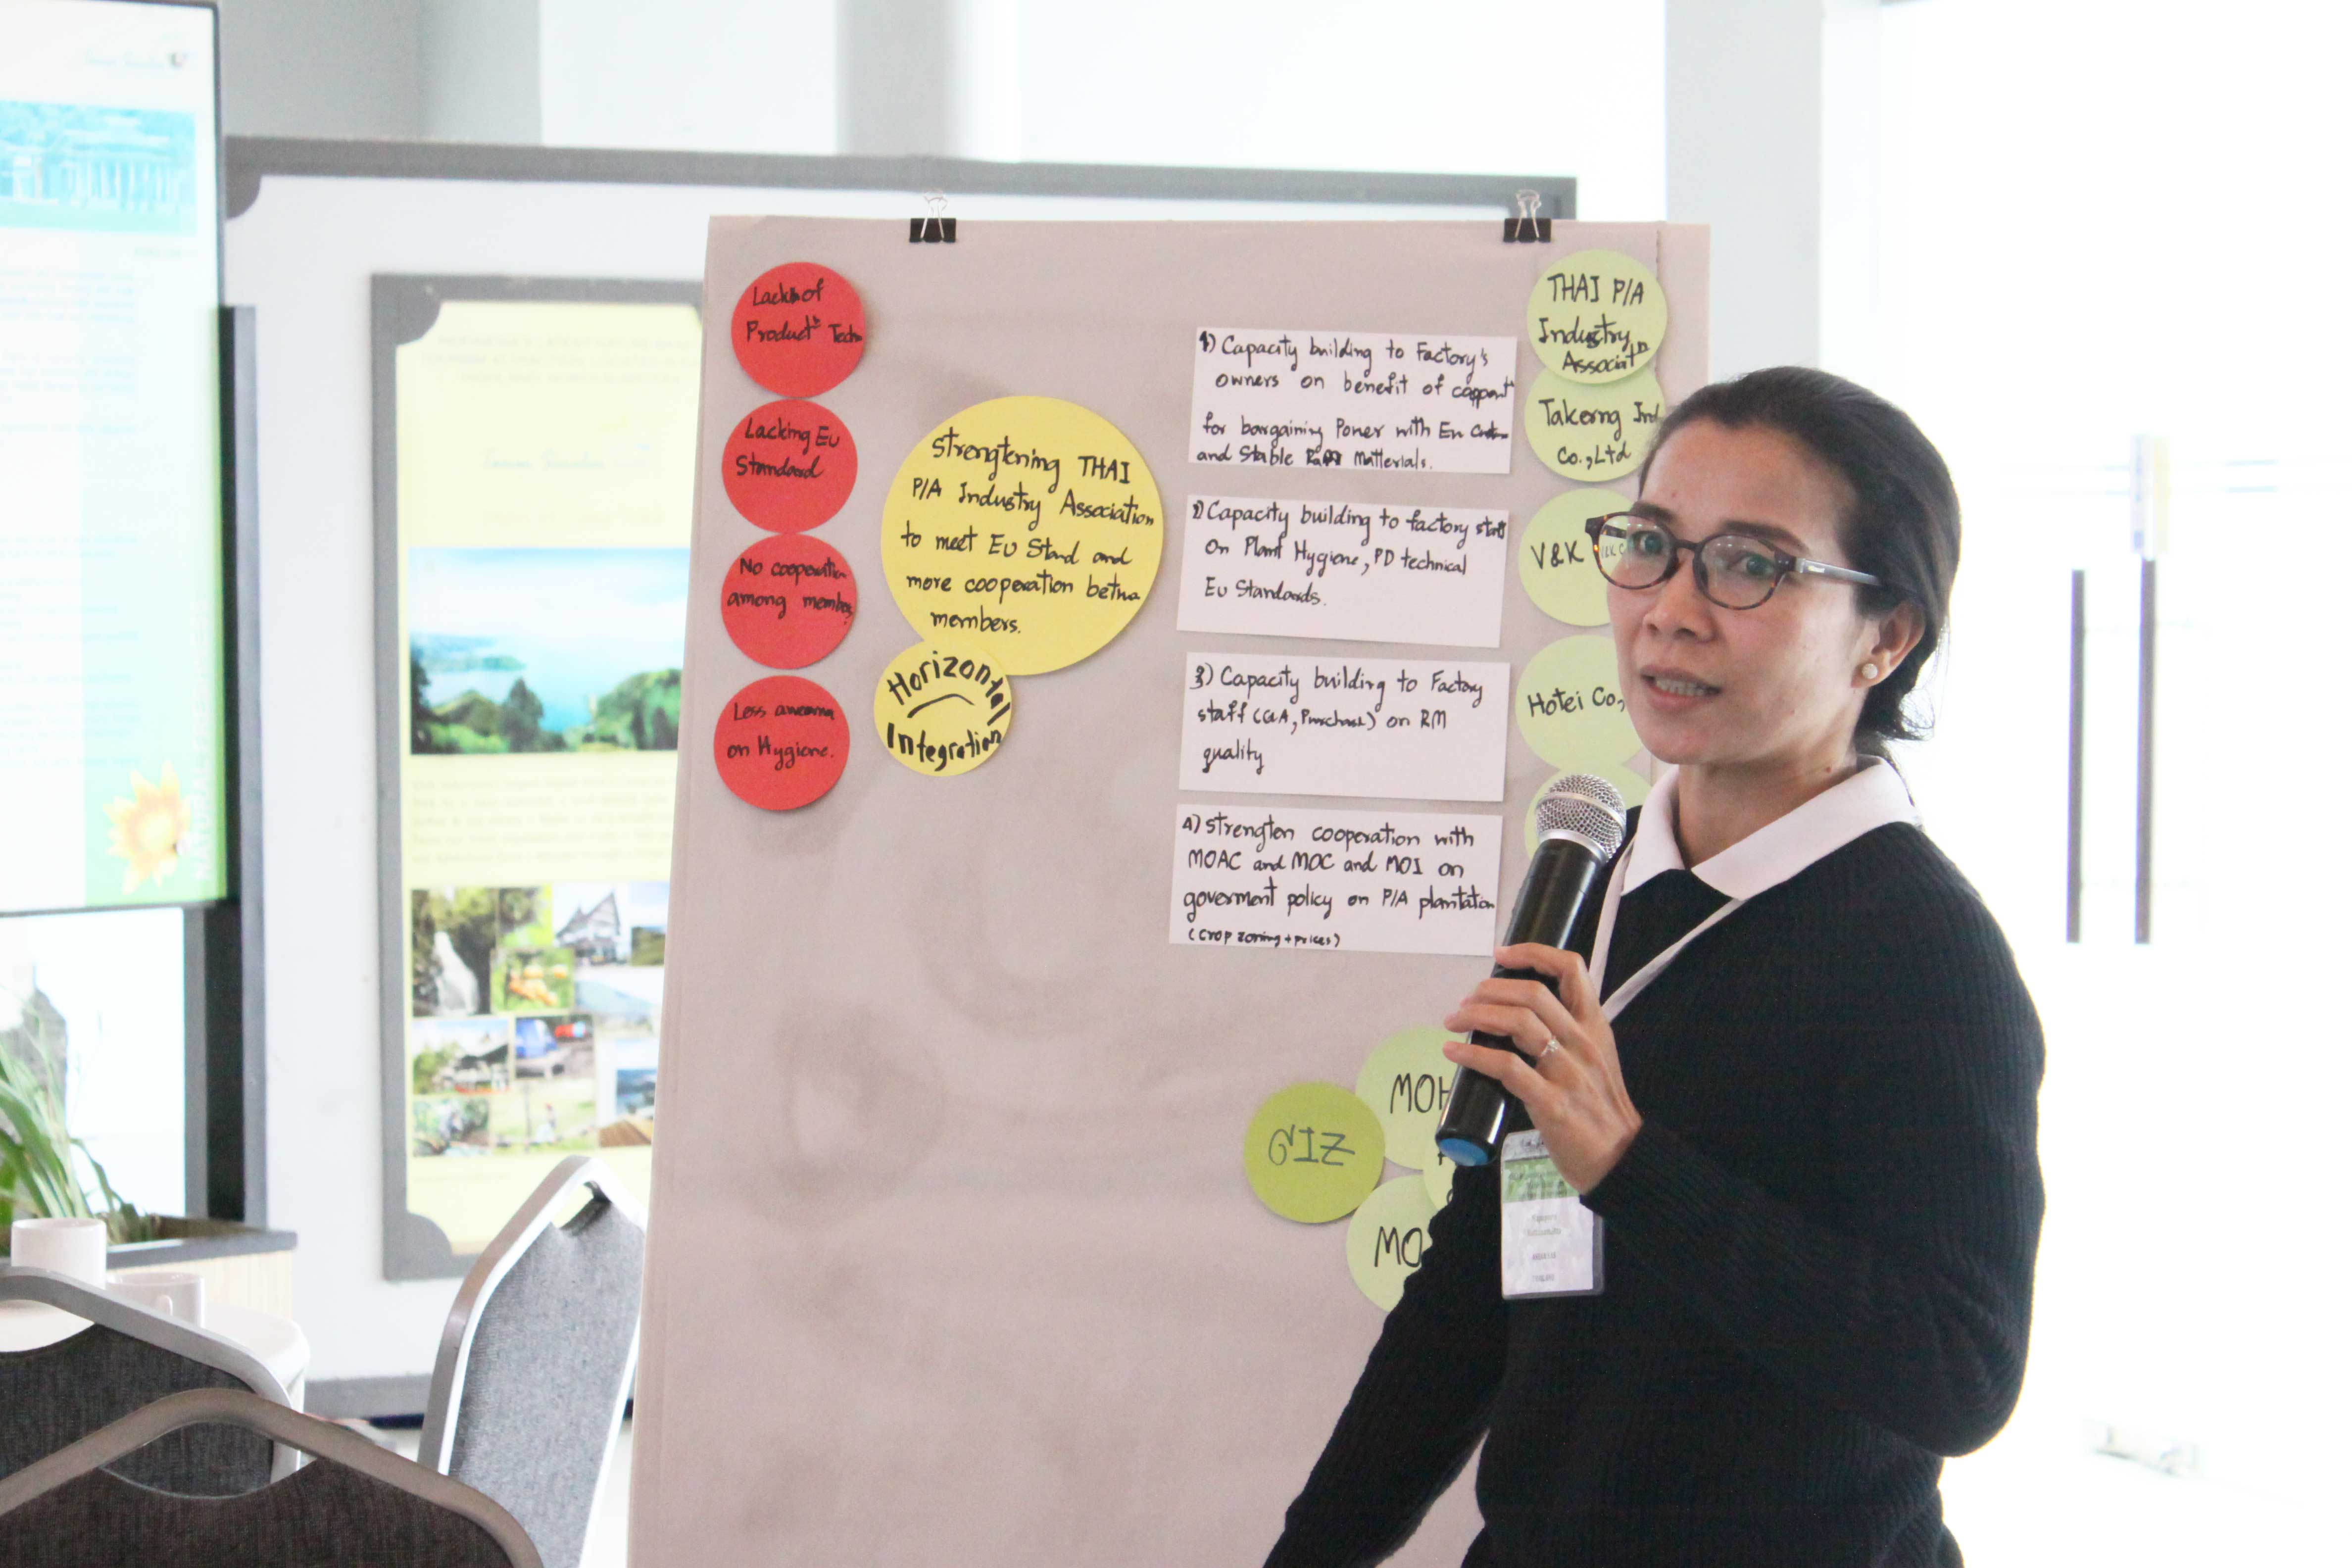 food-safety-project-manager-of-the-asean-sas-shares-her-experiences-on-her-fruit-juice-project-in-thailand-at-the-workshop-on-market-linkages-in-indonesia